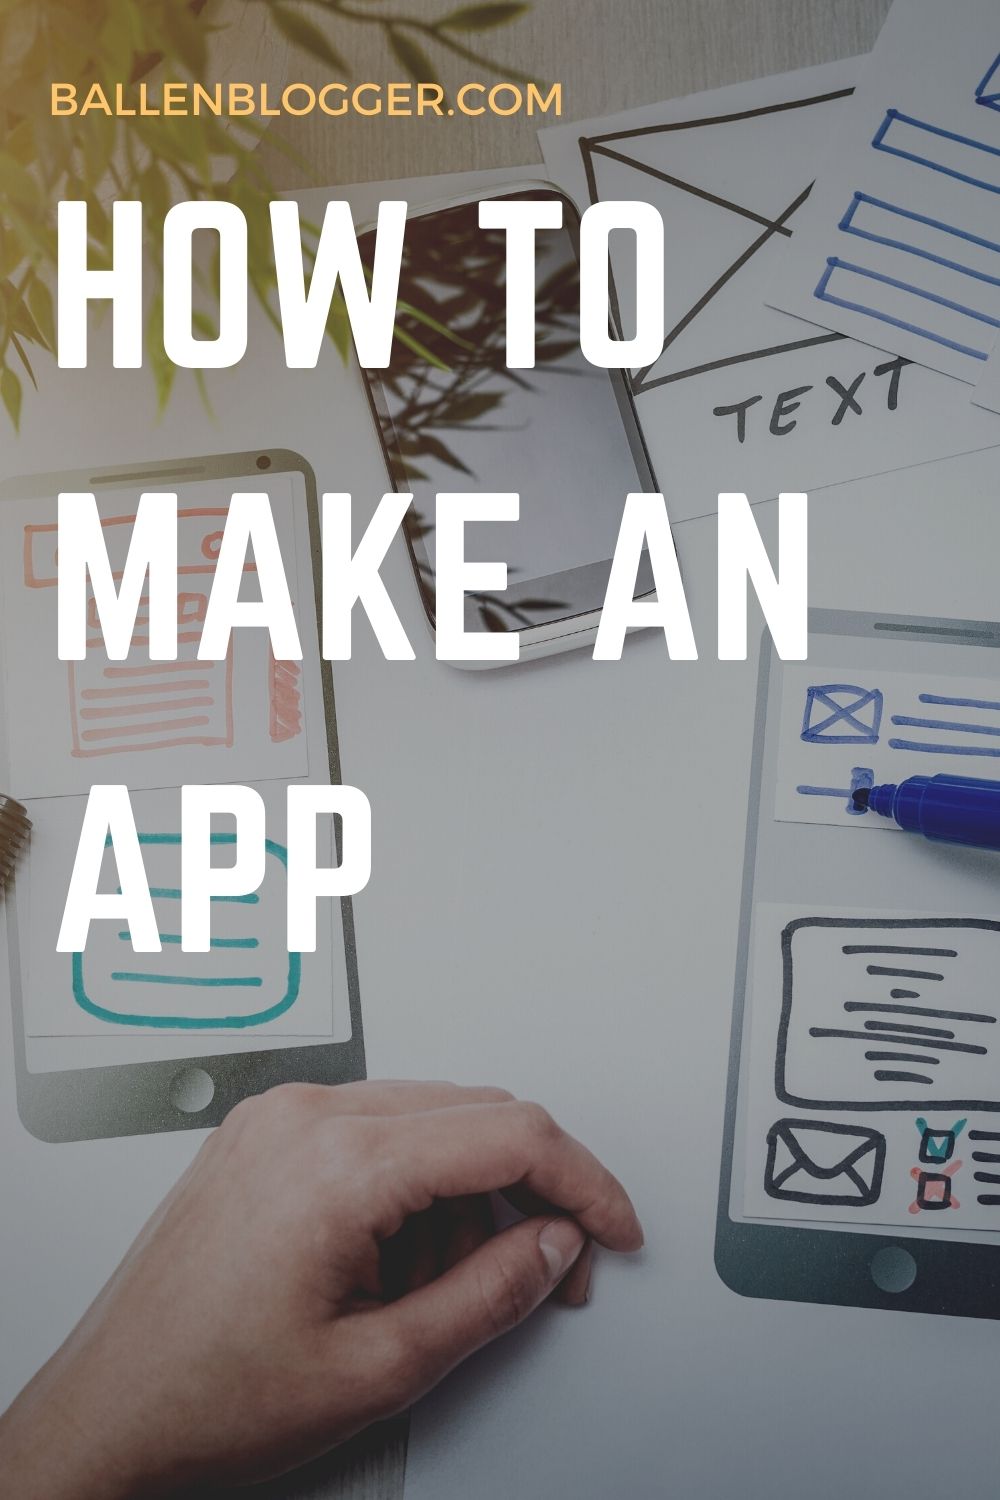 Creating an app is a necessary part of any business marketing strategy in 2021, but it is not a skill that everyone has mastered yet. Fortunately, with the right tools at your disposal, creating your own app does not have to be a struggle.